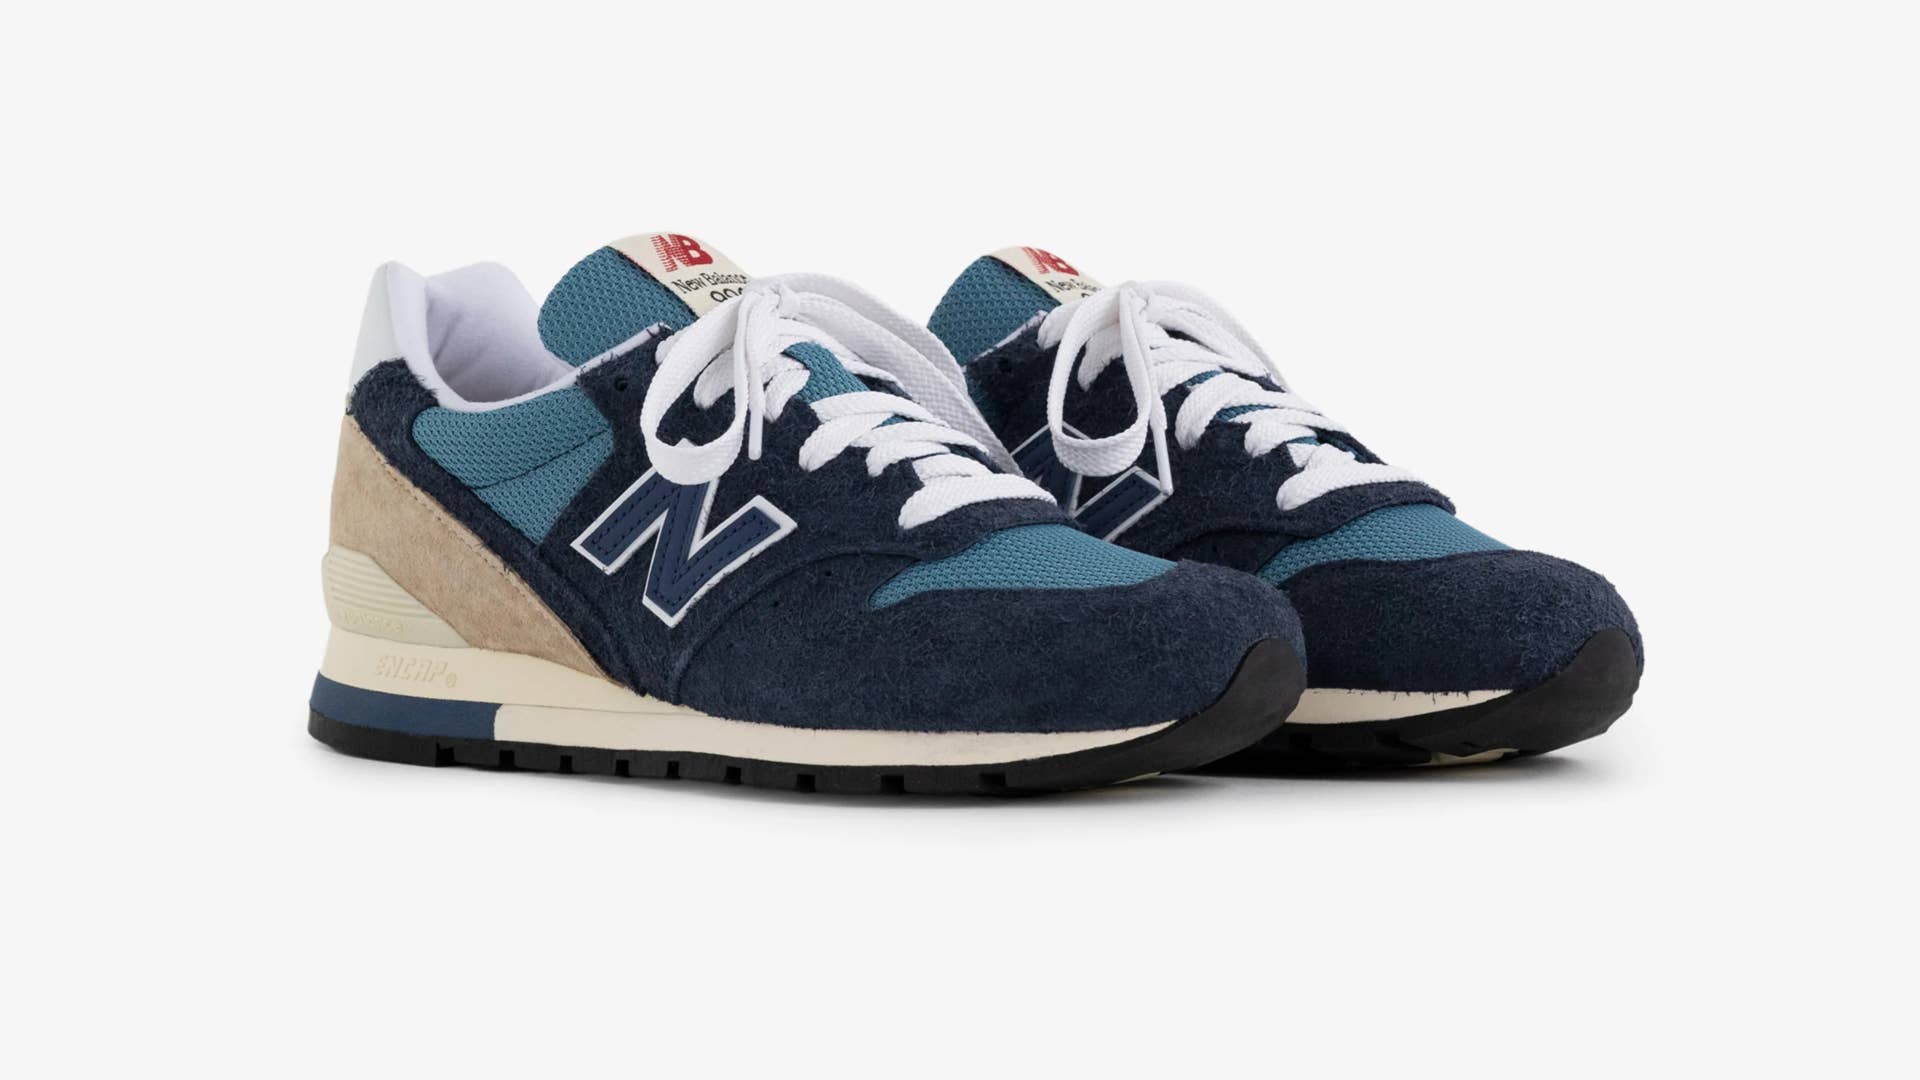 New Balance and ALD shoe release